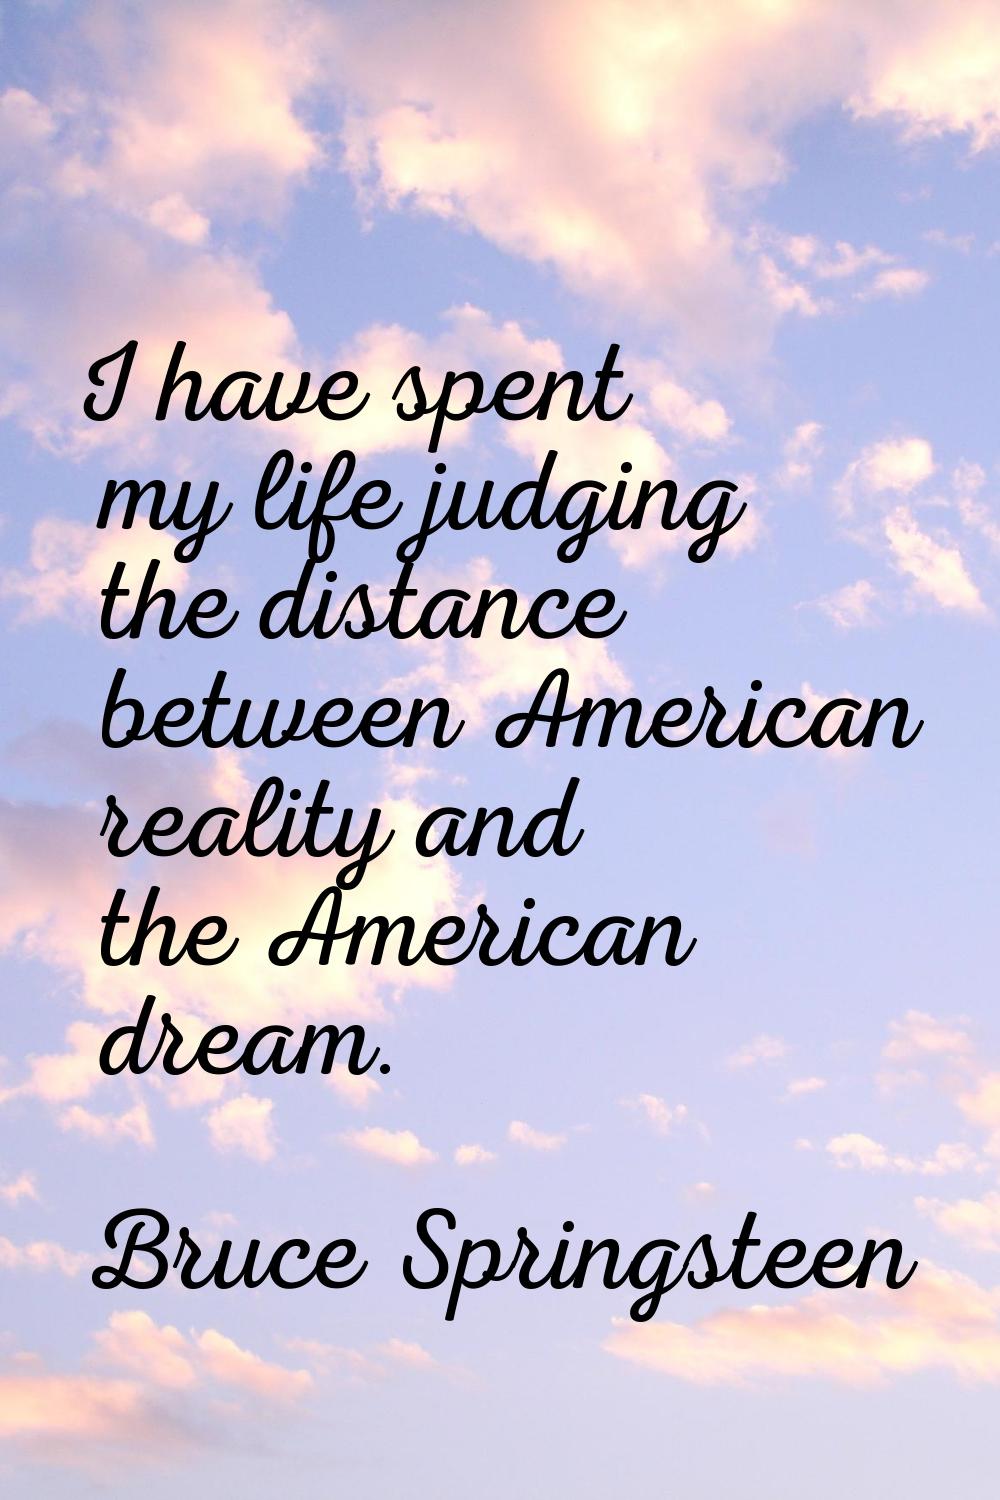 I have spent my life judging the distance between American reality and the American dream.